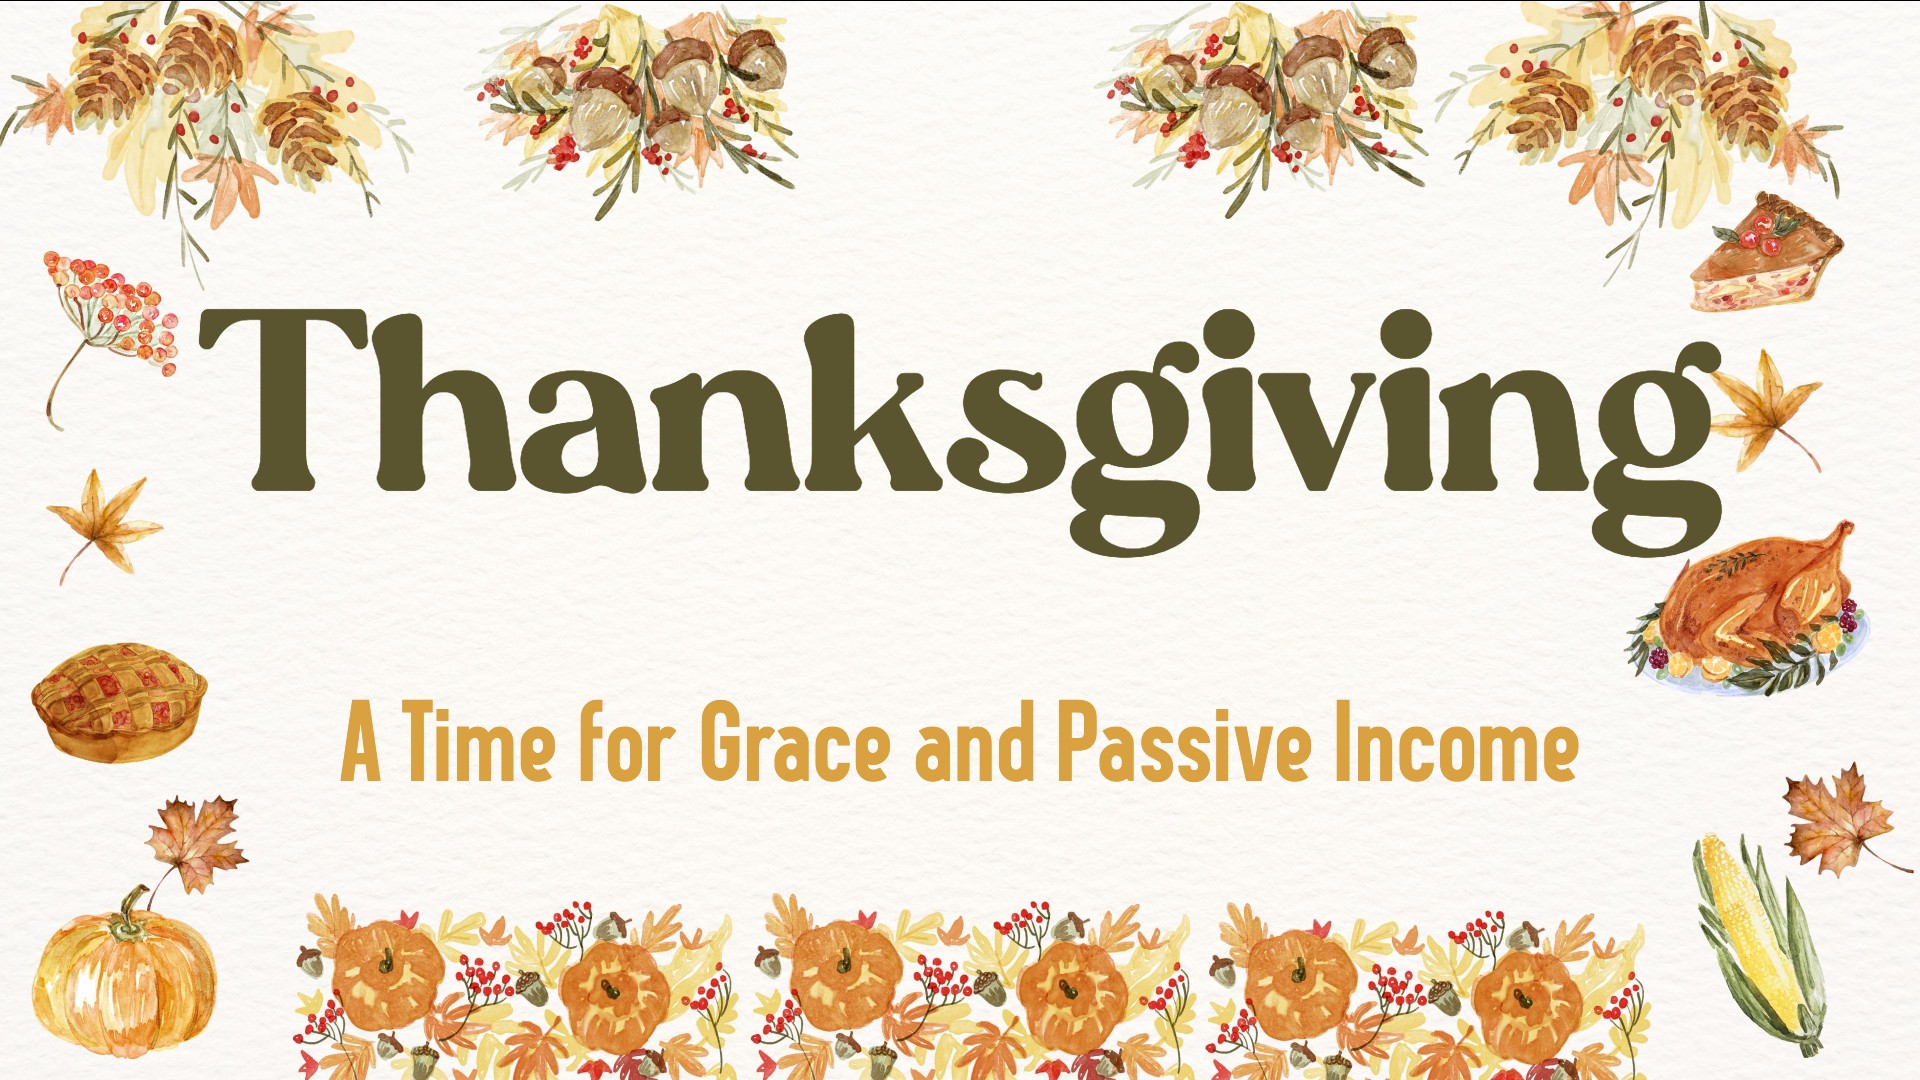 Thanksgiving A Time for Grace and Passive Income